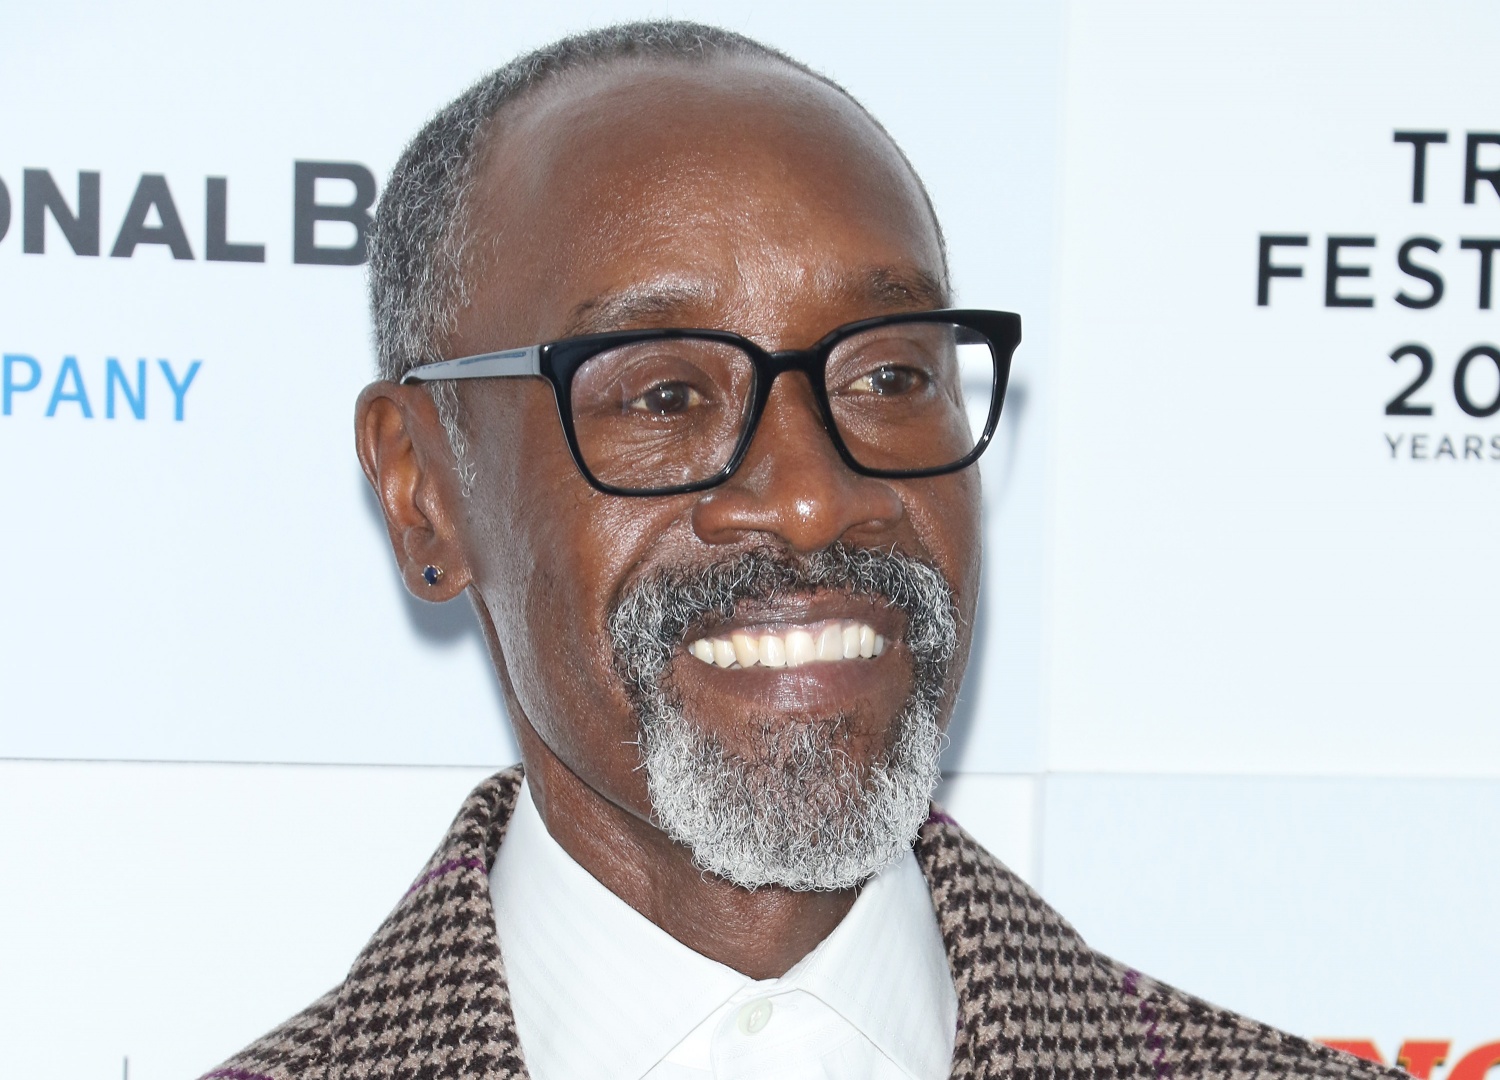  Actor Don Cheadle attends the "No Sudden Move" premiere during the 2021 Tribeca Festival at The Battery on June 18, 2021 in New York City. (Photo by Jim Spellman/WireImage,)